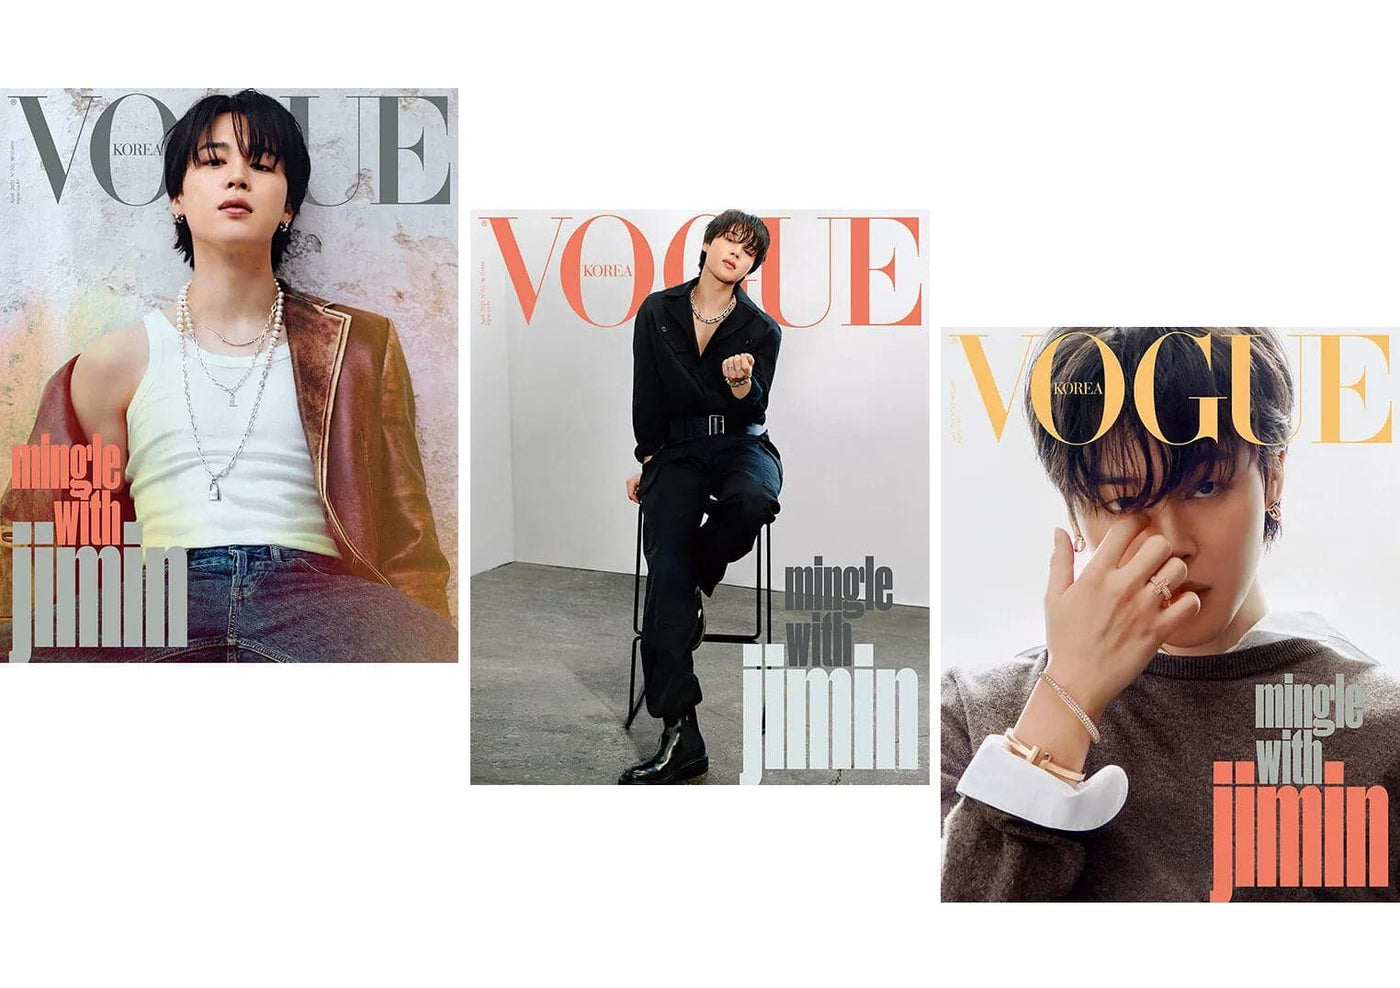 BTS RM - COVER VOGUE MAGAZINE (2023 JUNE ISSUE) - Cover A